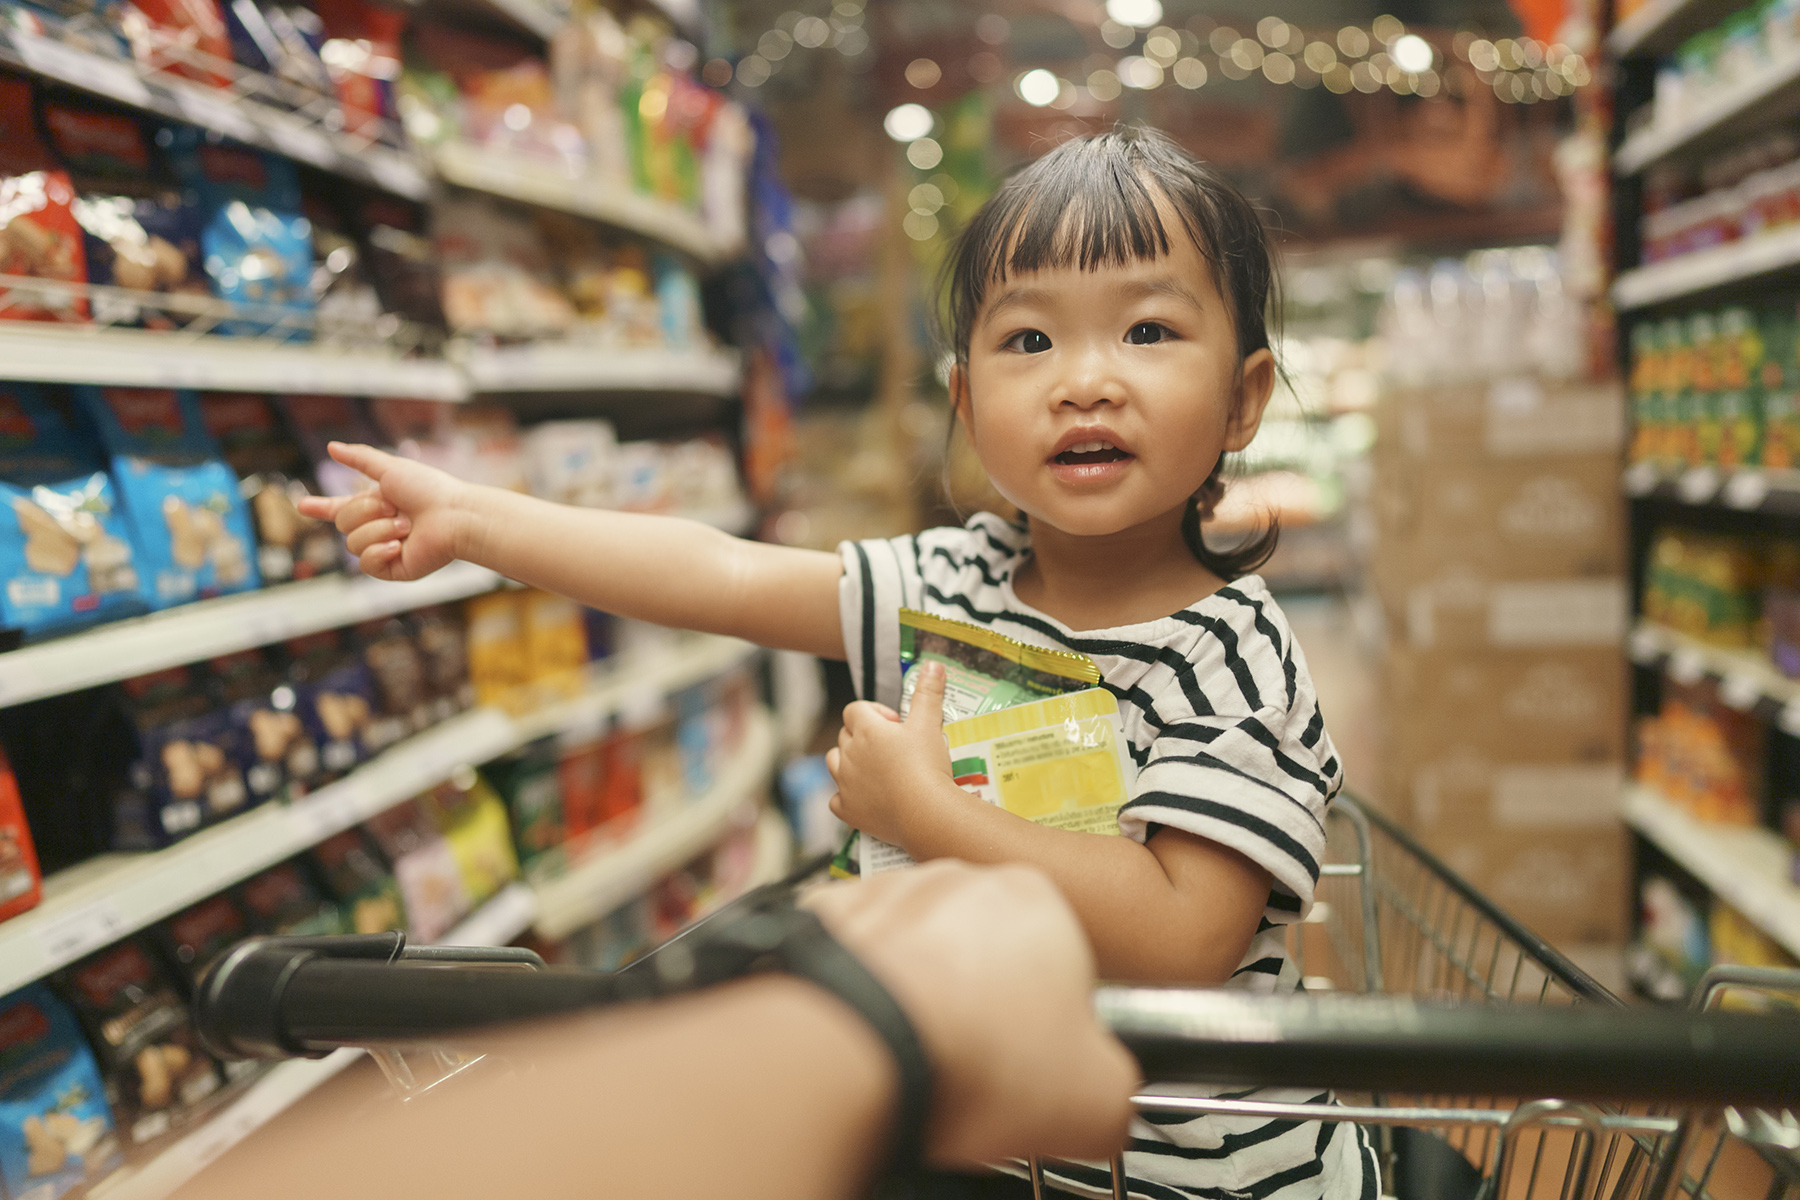 Little girl holds a packet of sweets and points to something in the shop aisle  while sitting in the shopping cart

